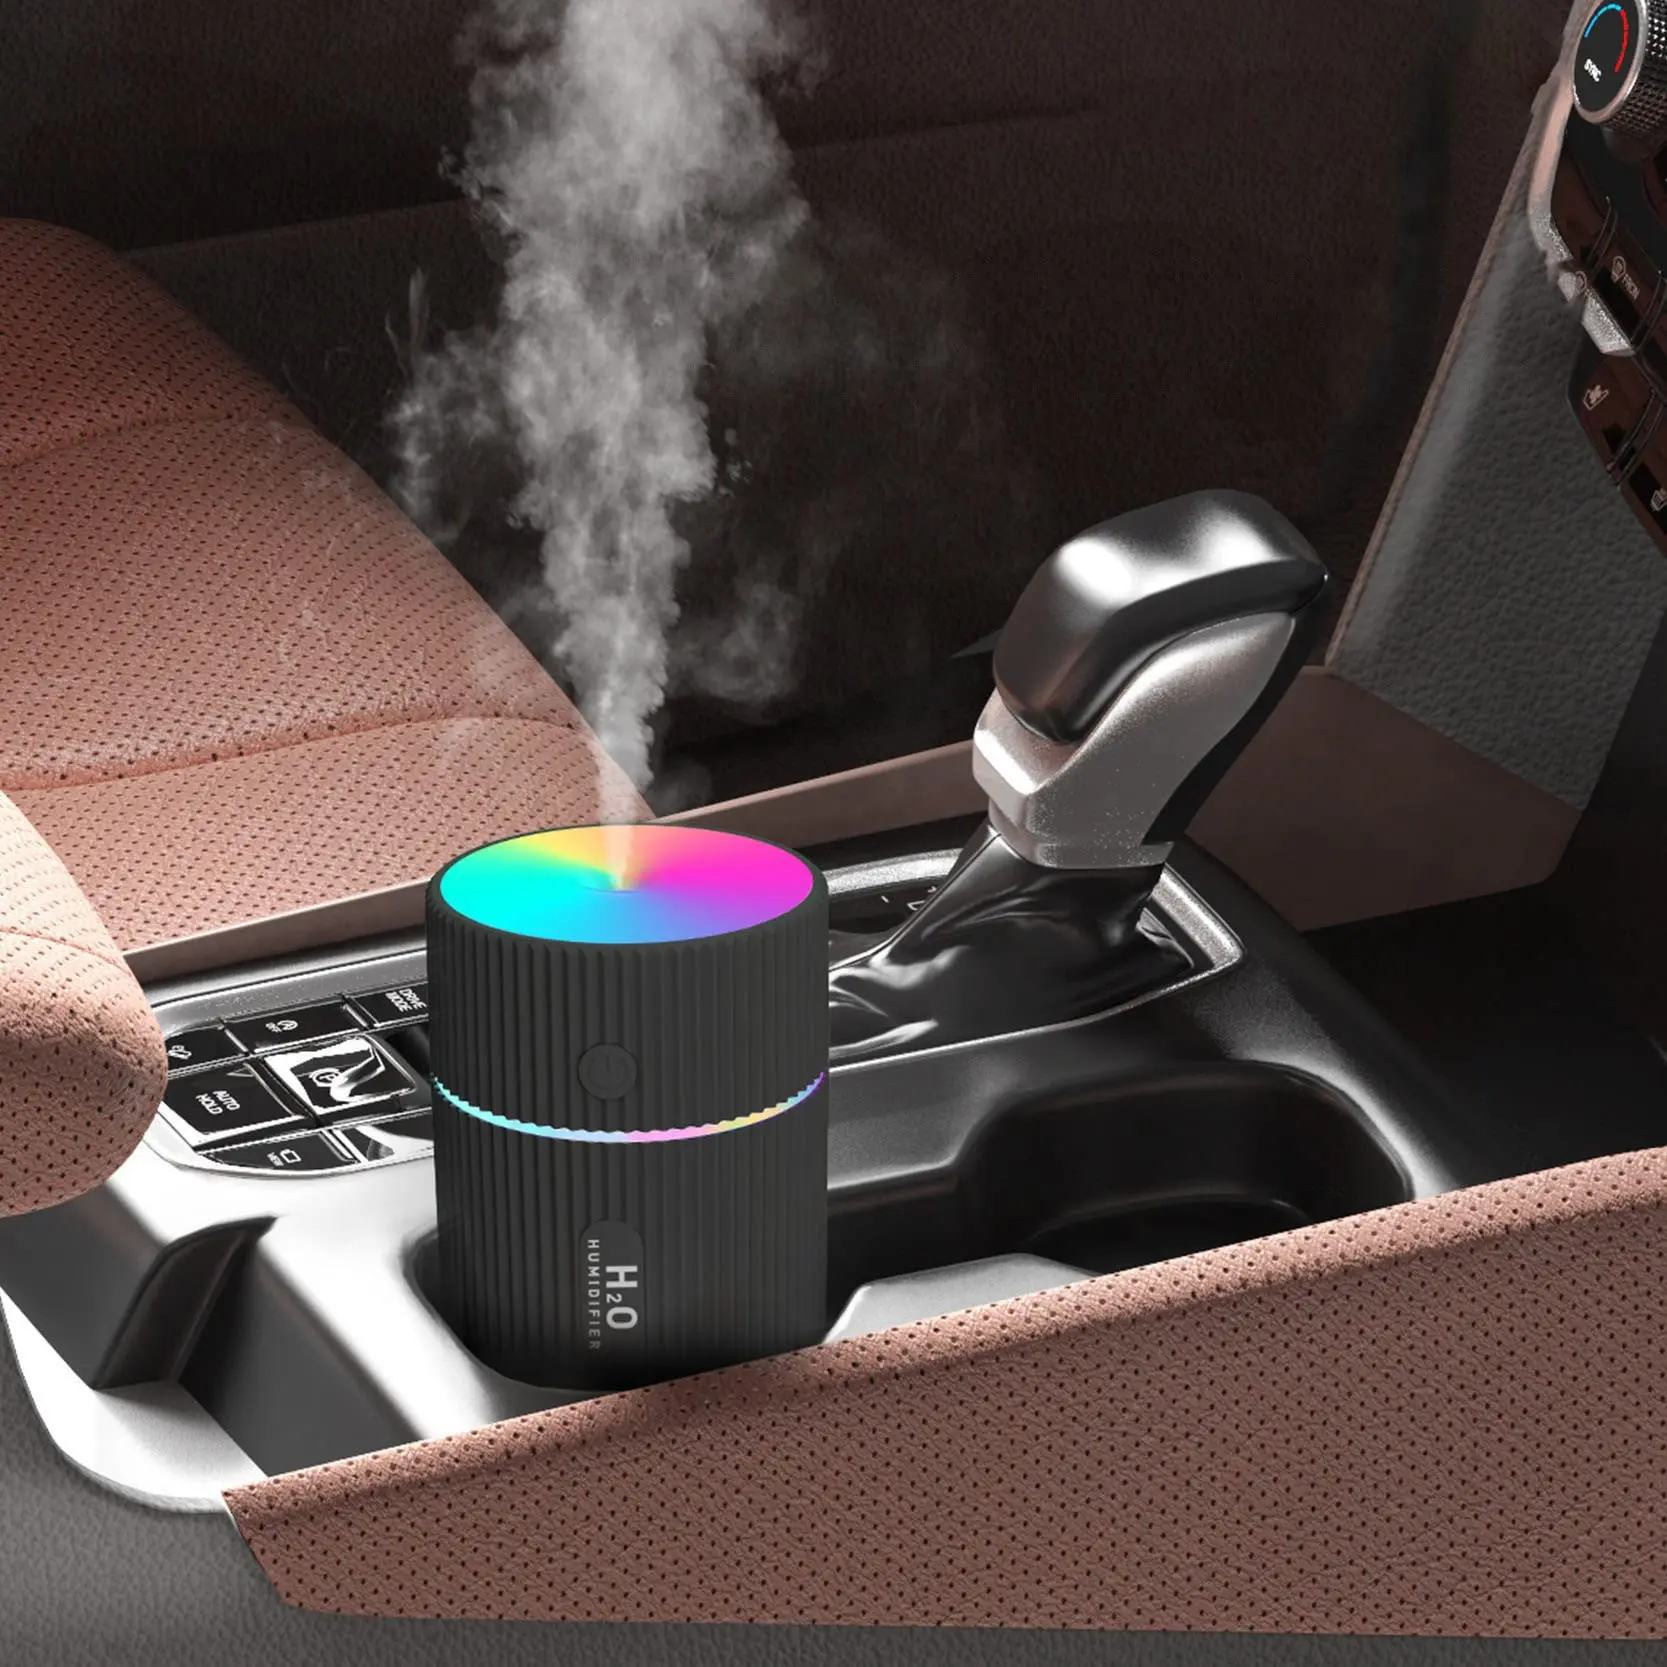 Car Humidifier Colorful Desktop Portable Mini  for Room Office Bedroom with Auto Off 2 Mist Modes, Super Quiet USB Black